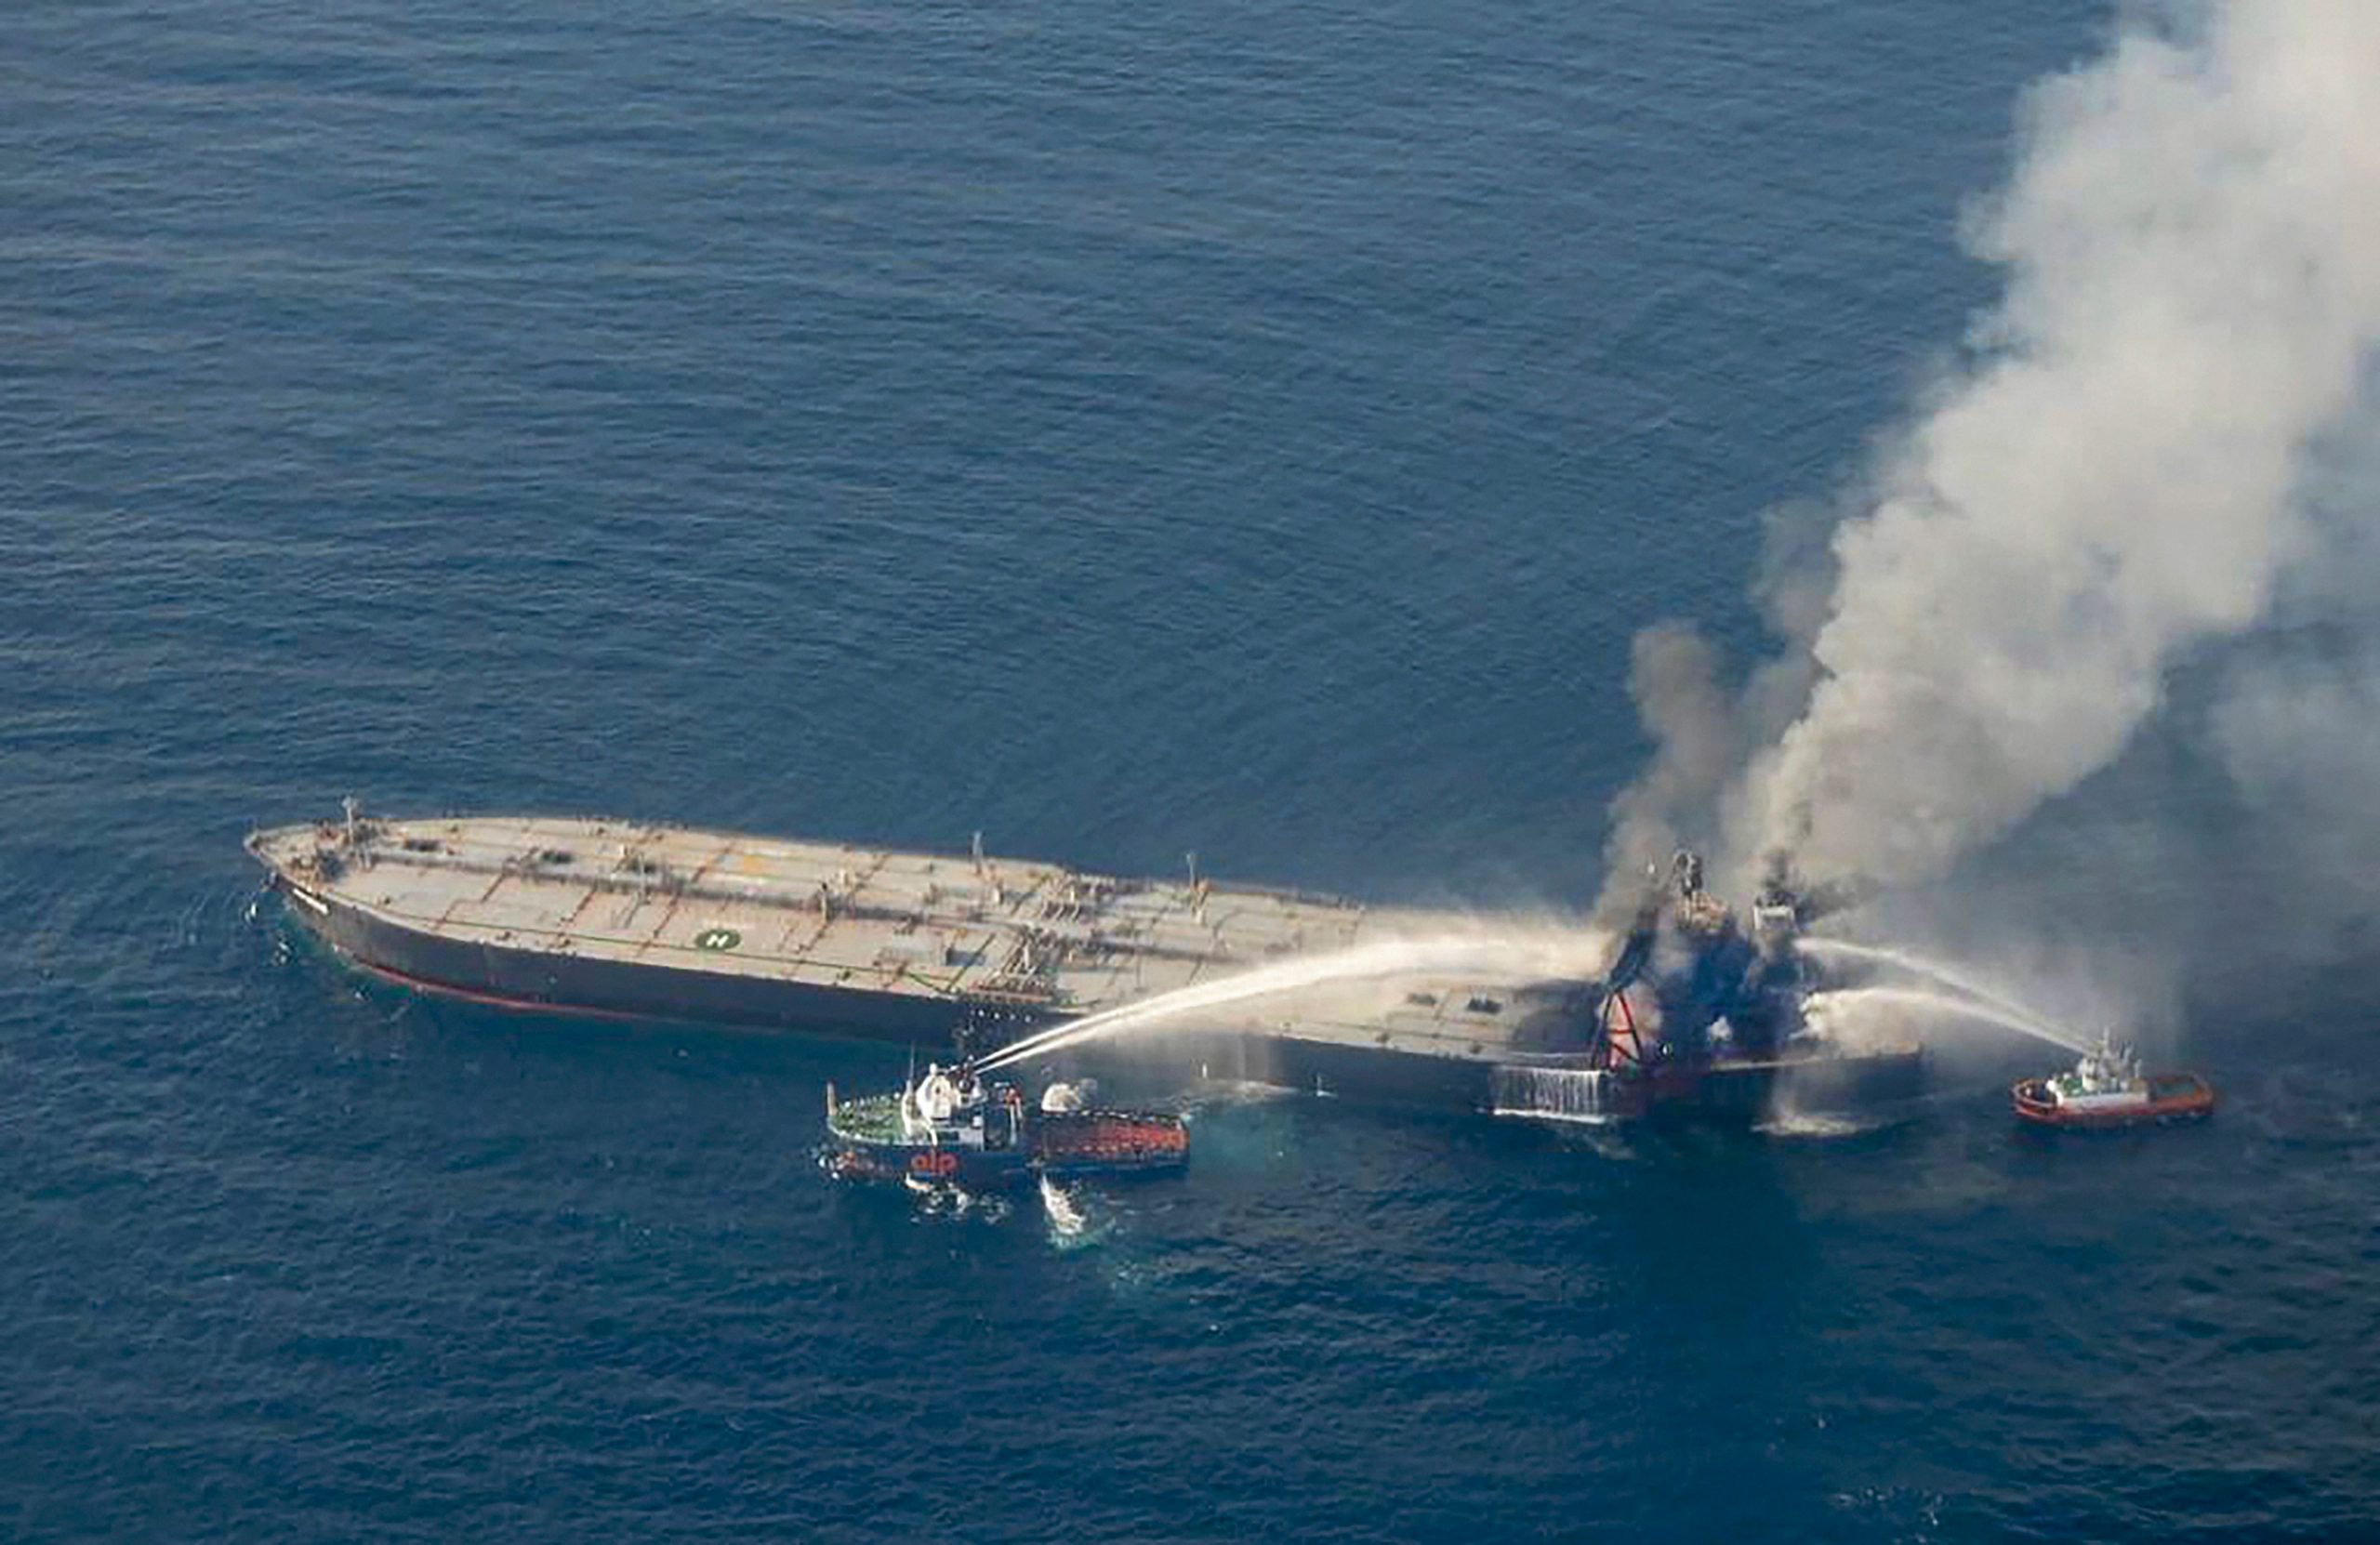 India, Sri Lanka continues to salvage burning oil tanker off Sri Lanka, experts join